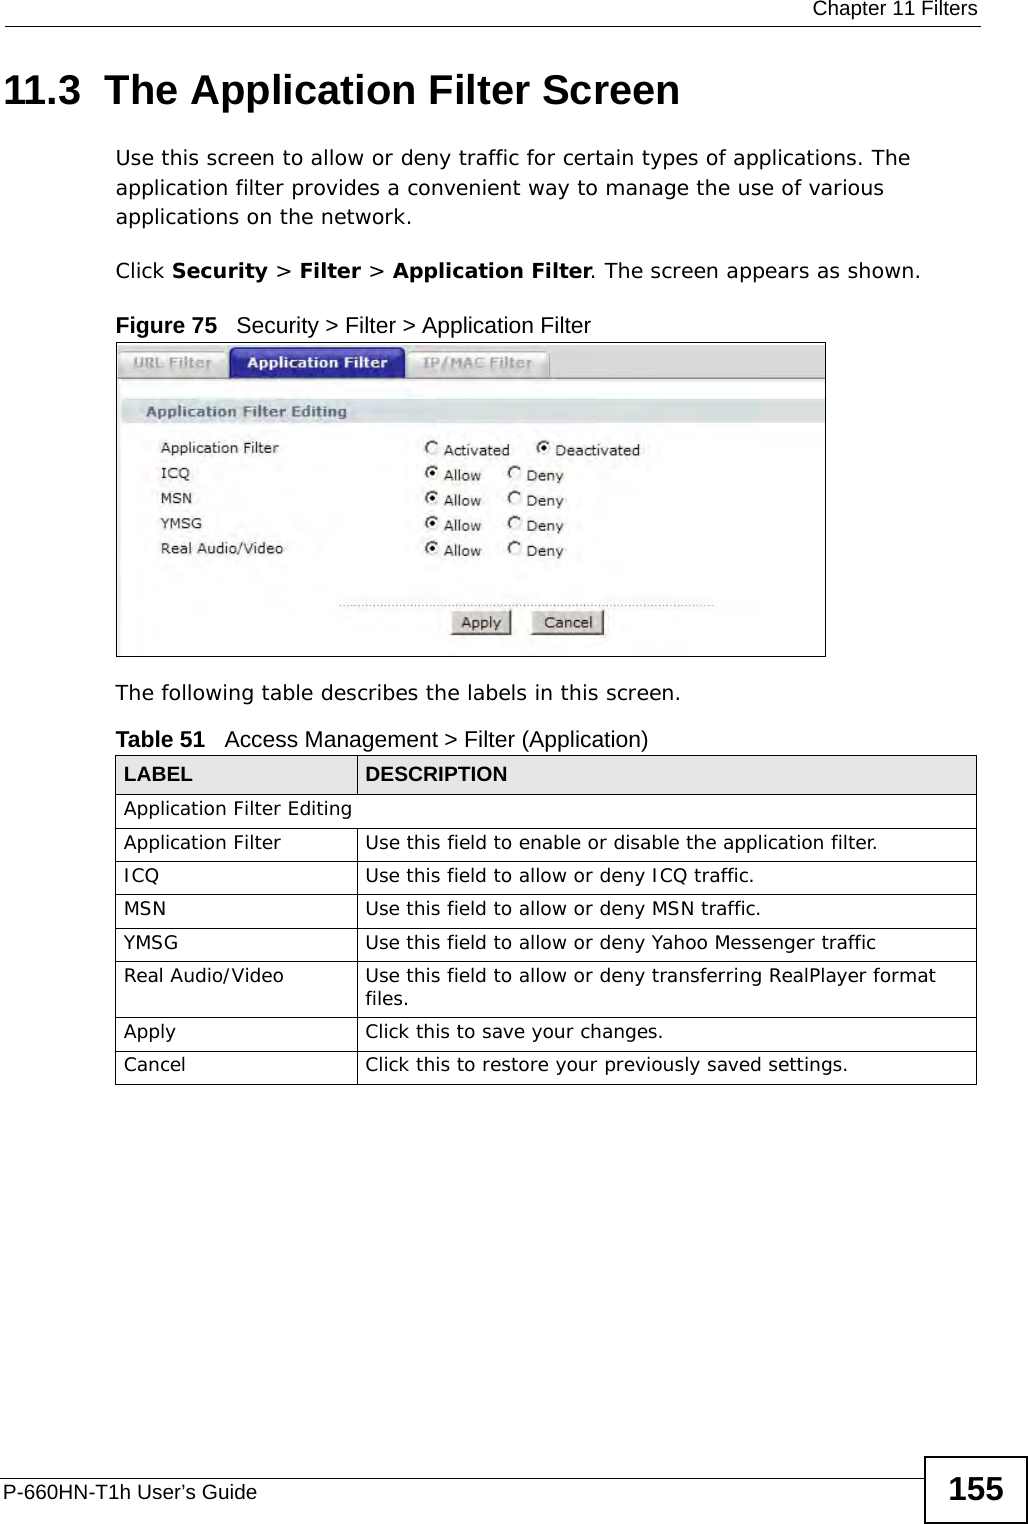  Chapter 11 FiltersP-660HN-T1h User’s Guide 15511.3  The Application Filter ScreenUse this screen to allow or deny traffic for certain types of applications. The application filter provides a convenient way to manage the use of various applications on the network.Click Security &gt; Filter &gt; Application Filter. The screen appears as shown.Figure 75   Security &gt; Filter &gt; Application FilterThe following table describes the labels in this screen. Table 51   Access Management &gt; Filter (Application)LABEL DESCRIPTIONApplication Filter EditingApplication Filter Use this field to enable or disable the application filter.ICQ Use this field to allow or deny ICQ traffic.MSN Use this field to allow or deny MSN traffic.YMSG Use this field to allow or deny Yahoo Messenger trafficReal Audio/Video Use this field to allow or deny transferring RealPlayer format files.Apply Click this to save your changes.Cancel Click this to restore your previously saved settings.